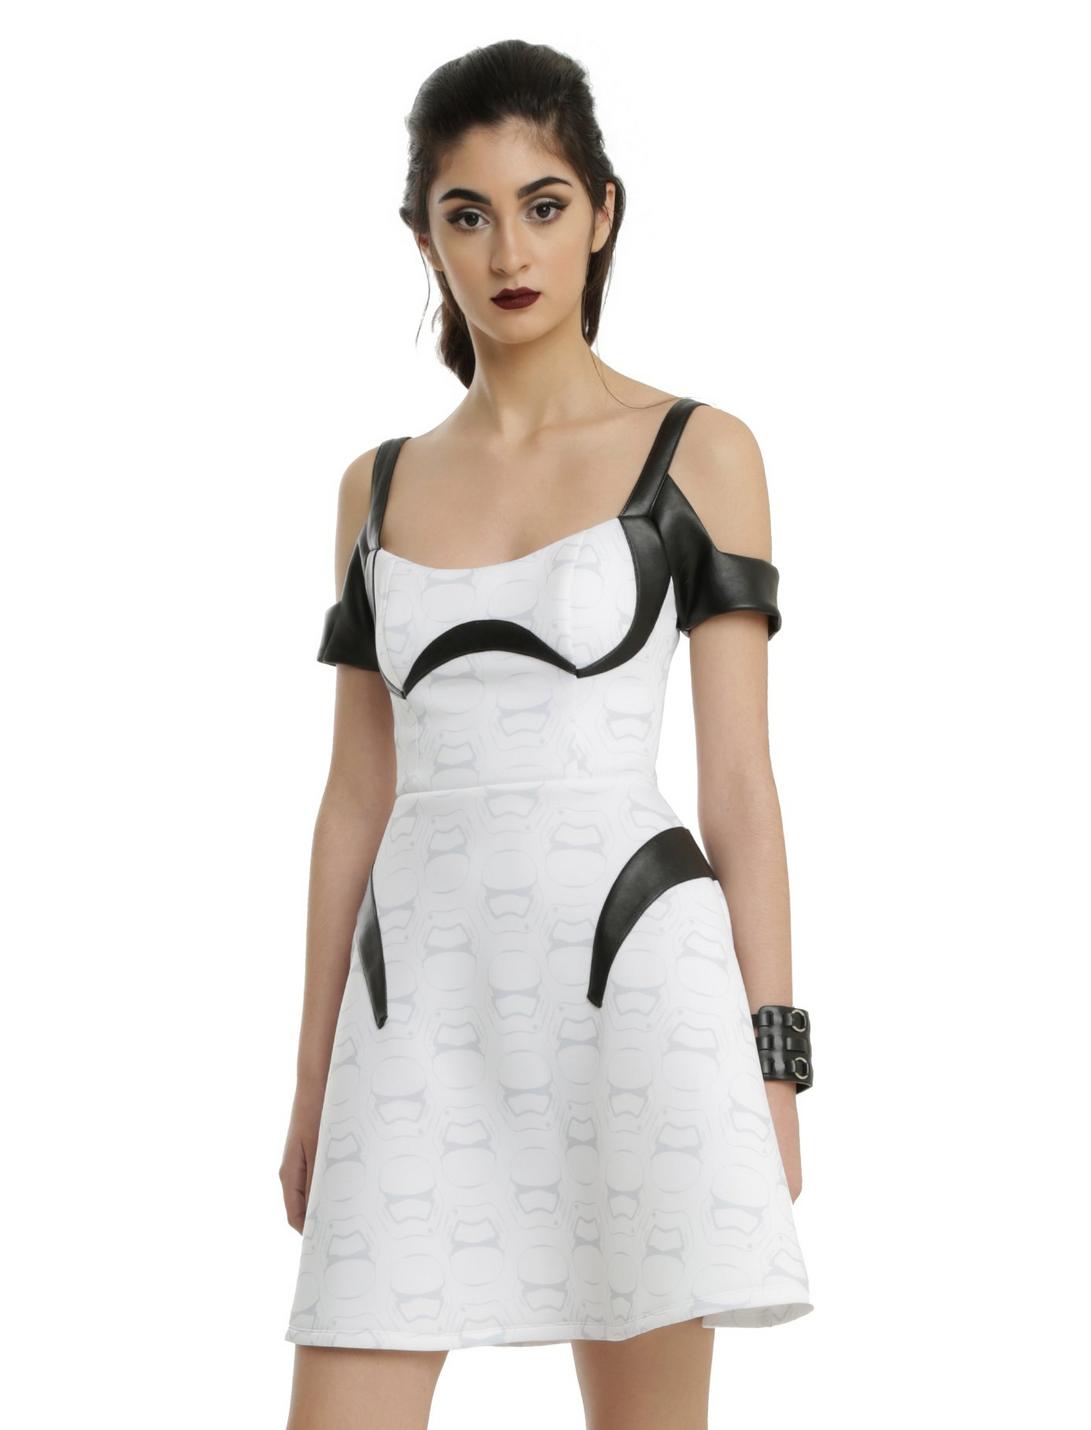 Star Wars By Her Universe Stormtrooper Dress, WHITE, hi-res